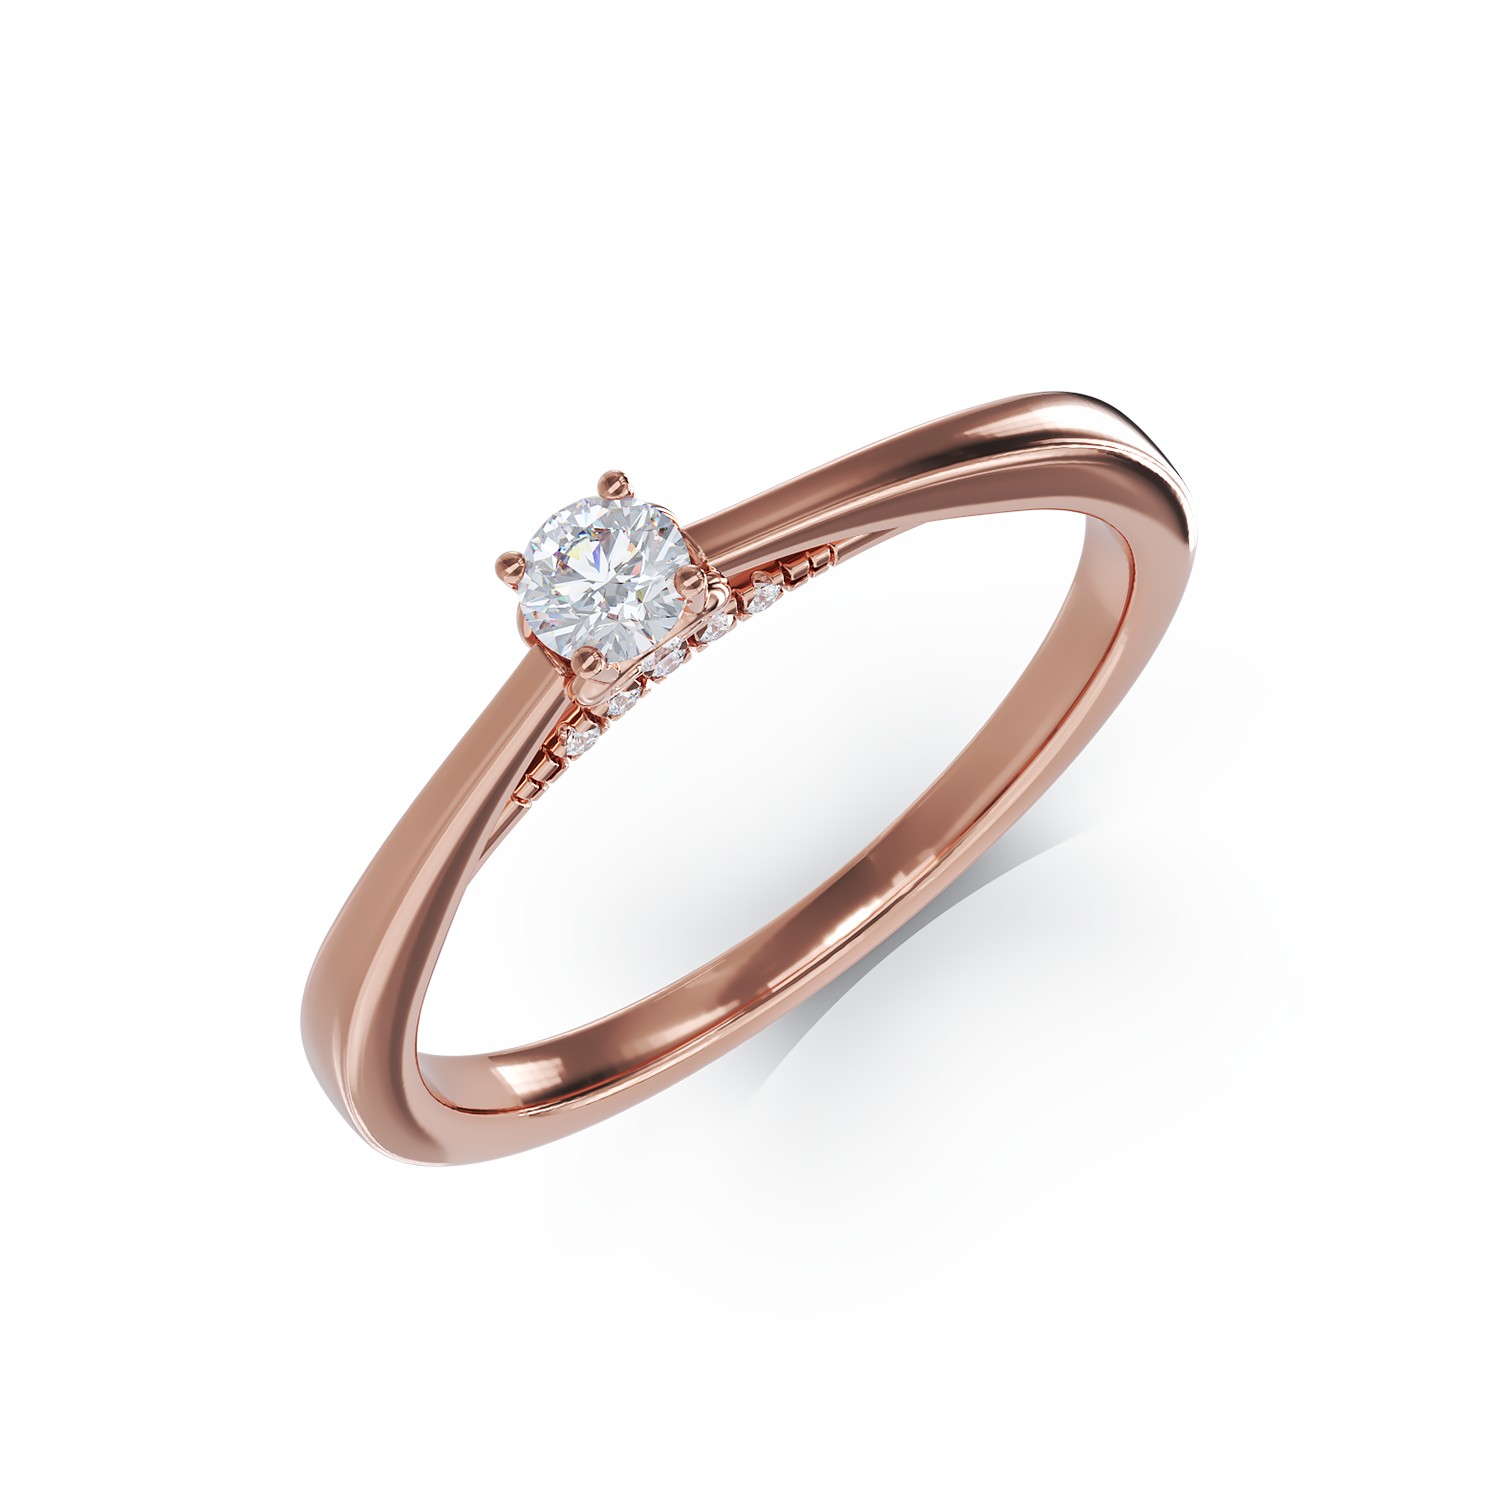 Rose gold engagement ring with 0.17ct diamonds